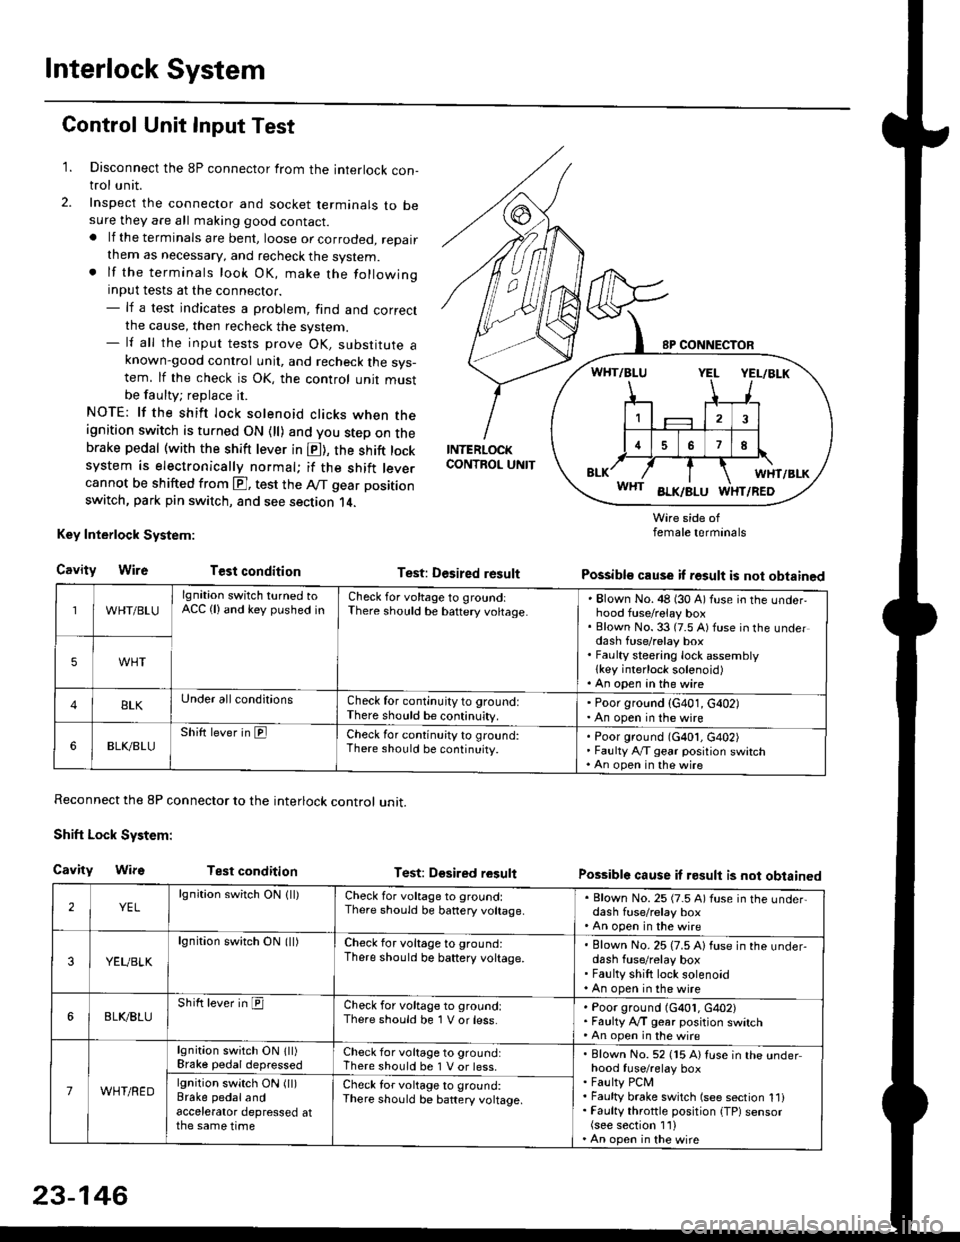 HONDA CIVIC 1997 6.G Service Manual Interlock System
Control Unit Input Test
1. Disconnect the 8P connector from the interlock con-trol unit.
2. Inspect the connector and socket terminals to besure they are all making good contact.. lf 